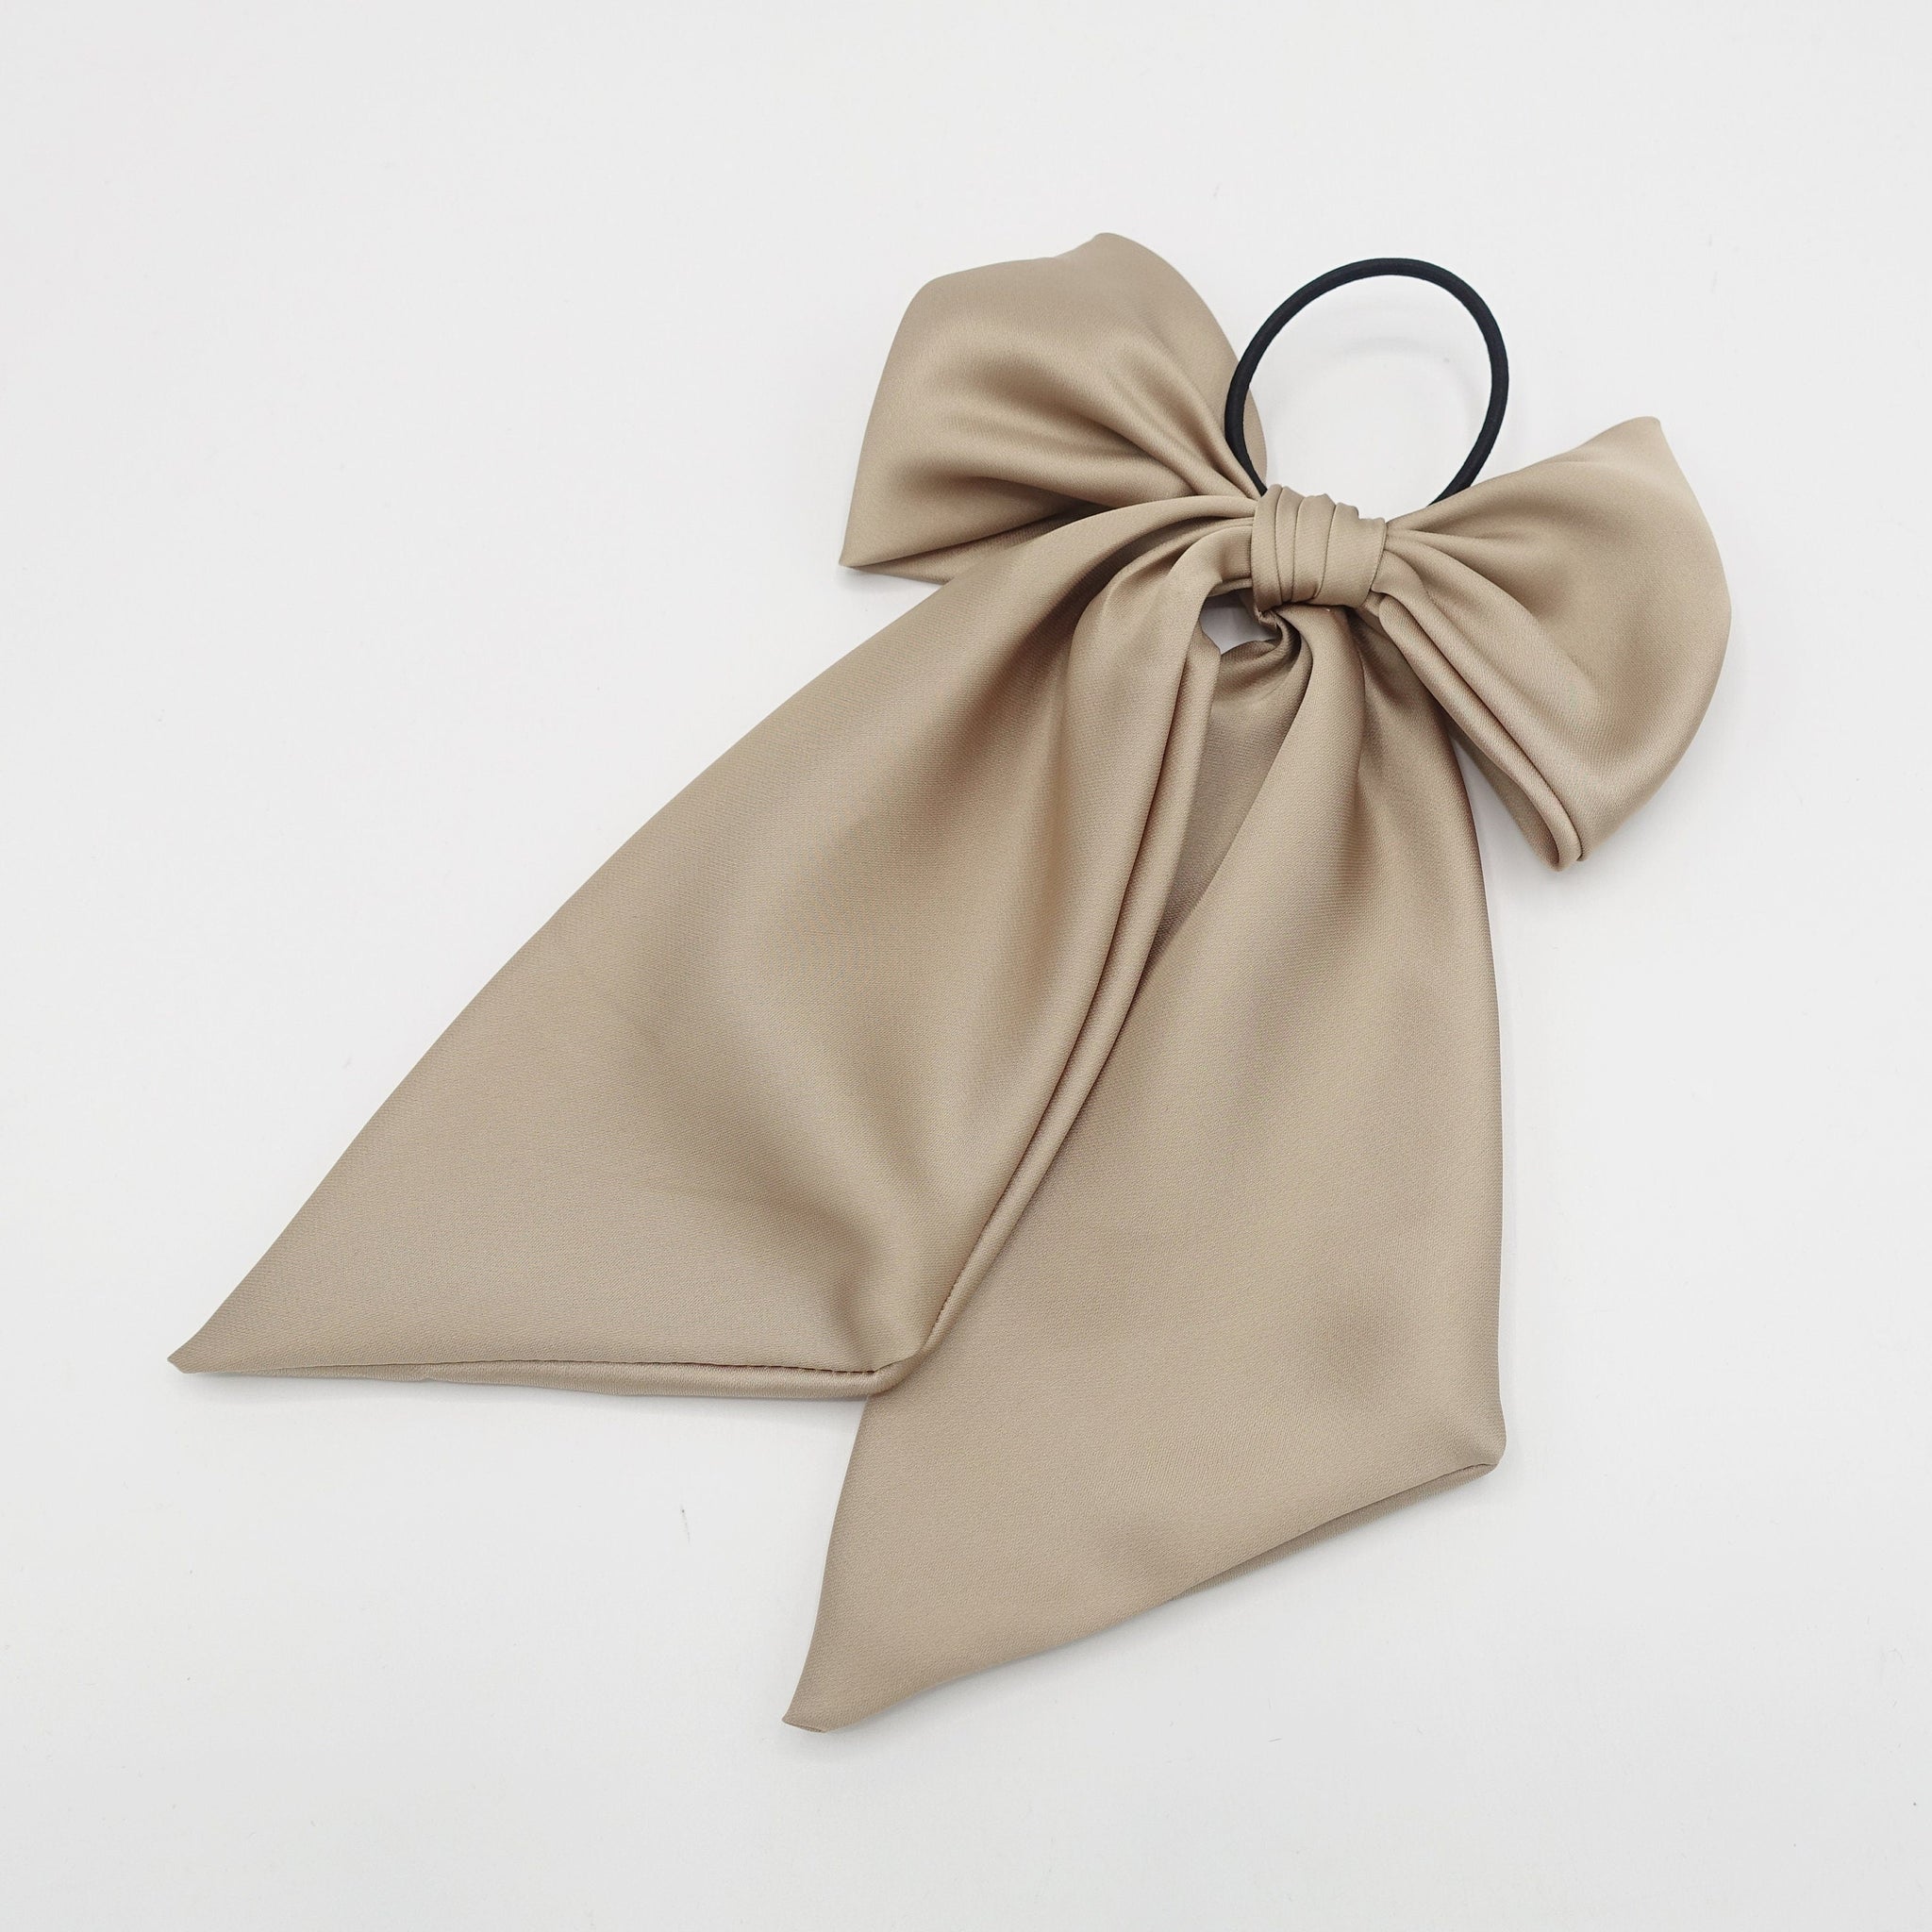 veryshine.com Ponytail holders glossy satin bow knot long tail hair tie solid color ponytail holder women hair elastic